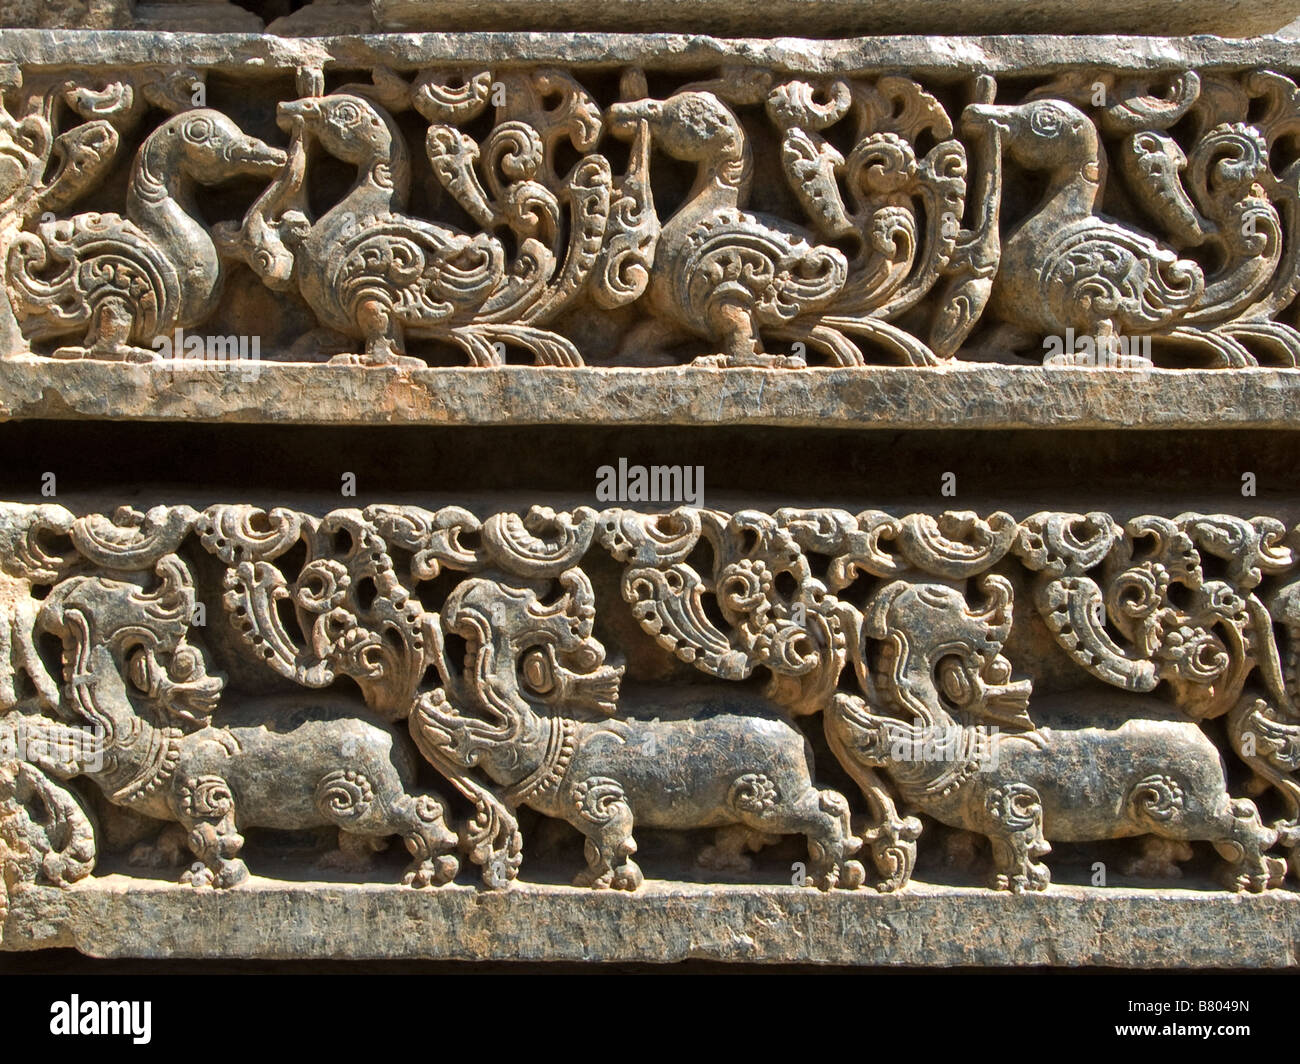 detail of relief carved frieze of decorative animal figures Stock Photo